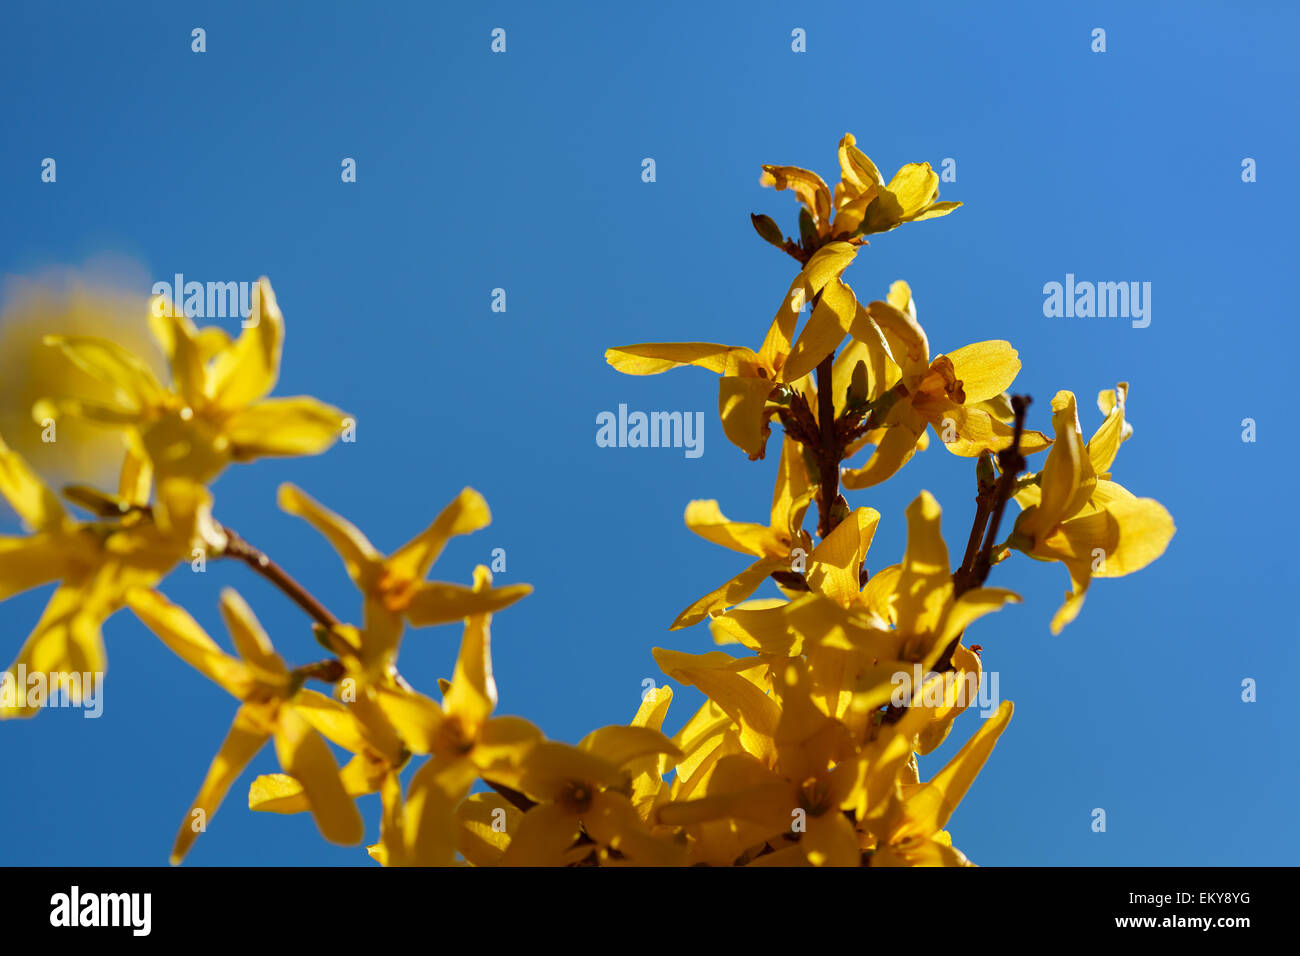 Forsythia flowers full of yellow tiny flowers macro against clear blue sky, spring season in Poland, Europe Stock Photo